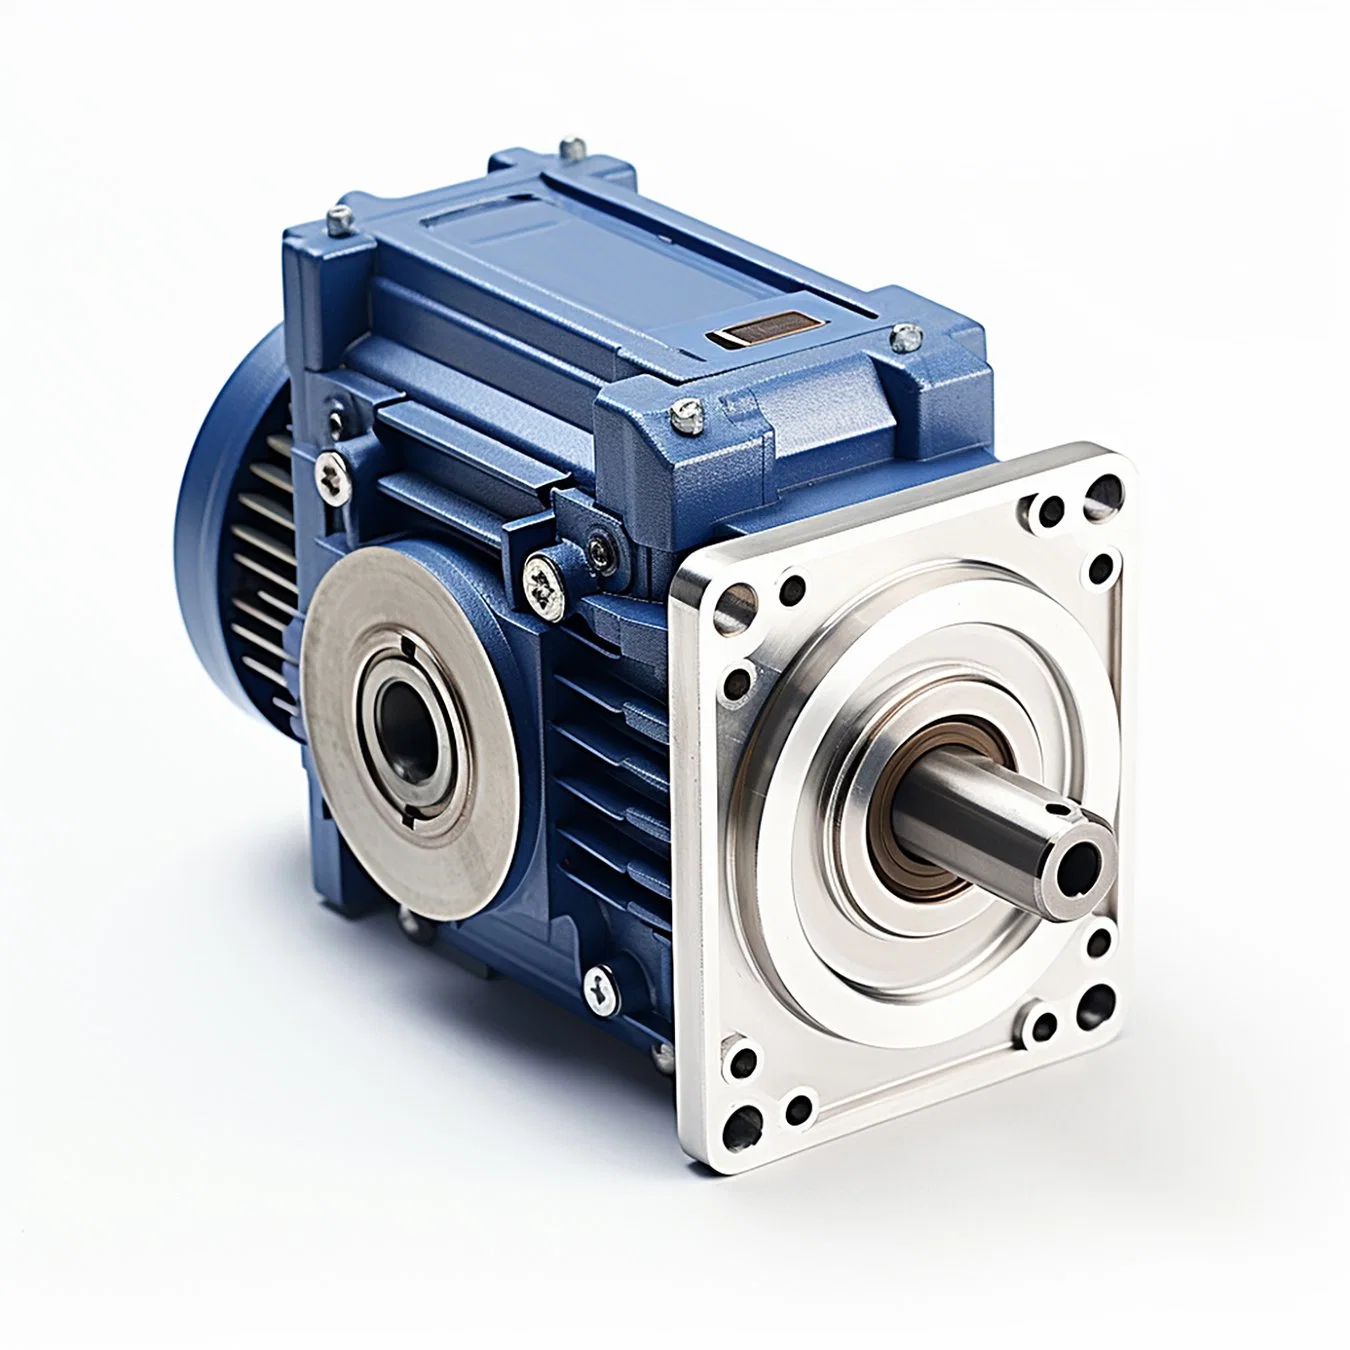 Ultra Reliable Pinion Gear Motor for Aerospace Manufacturing